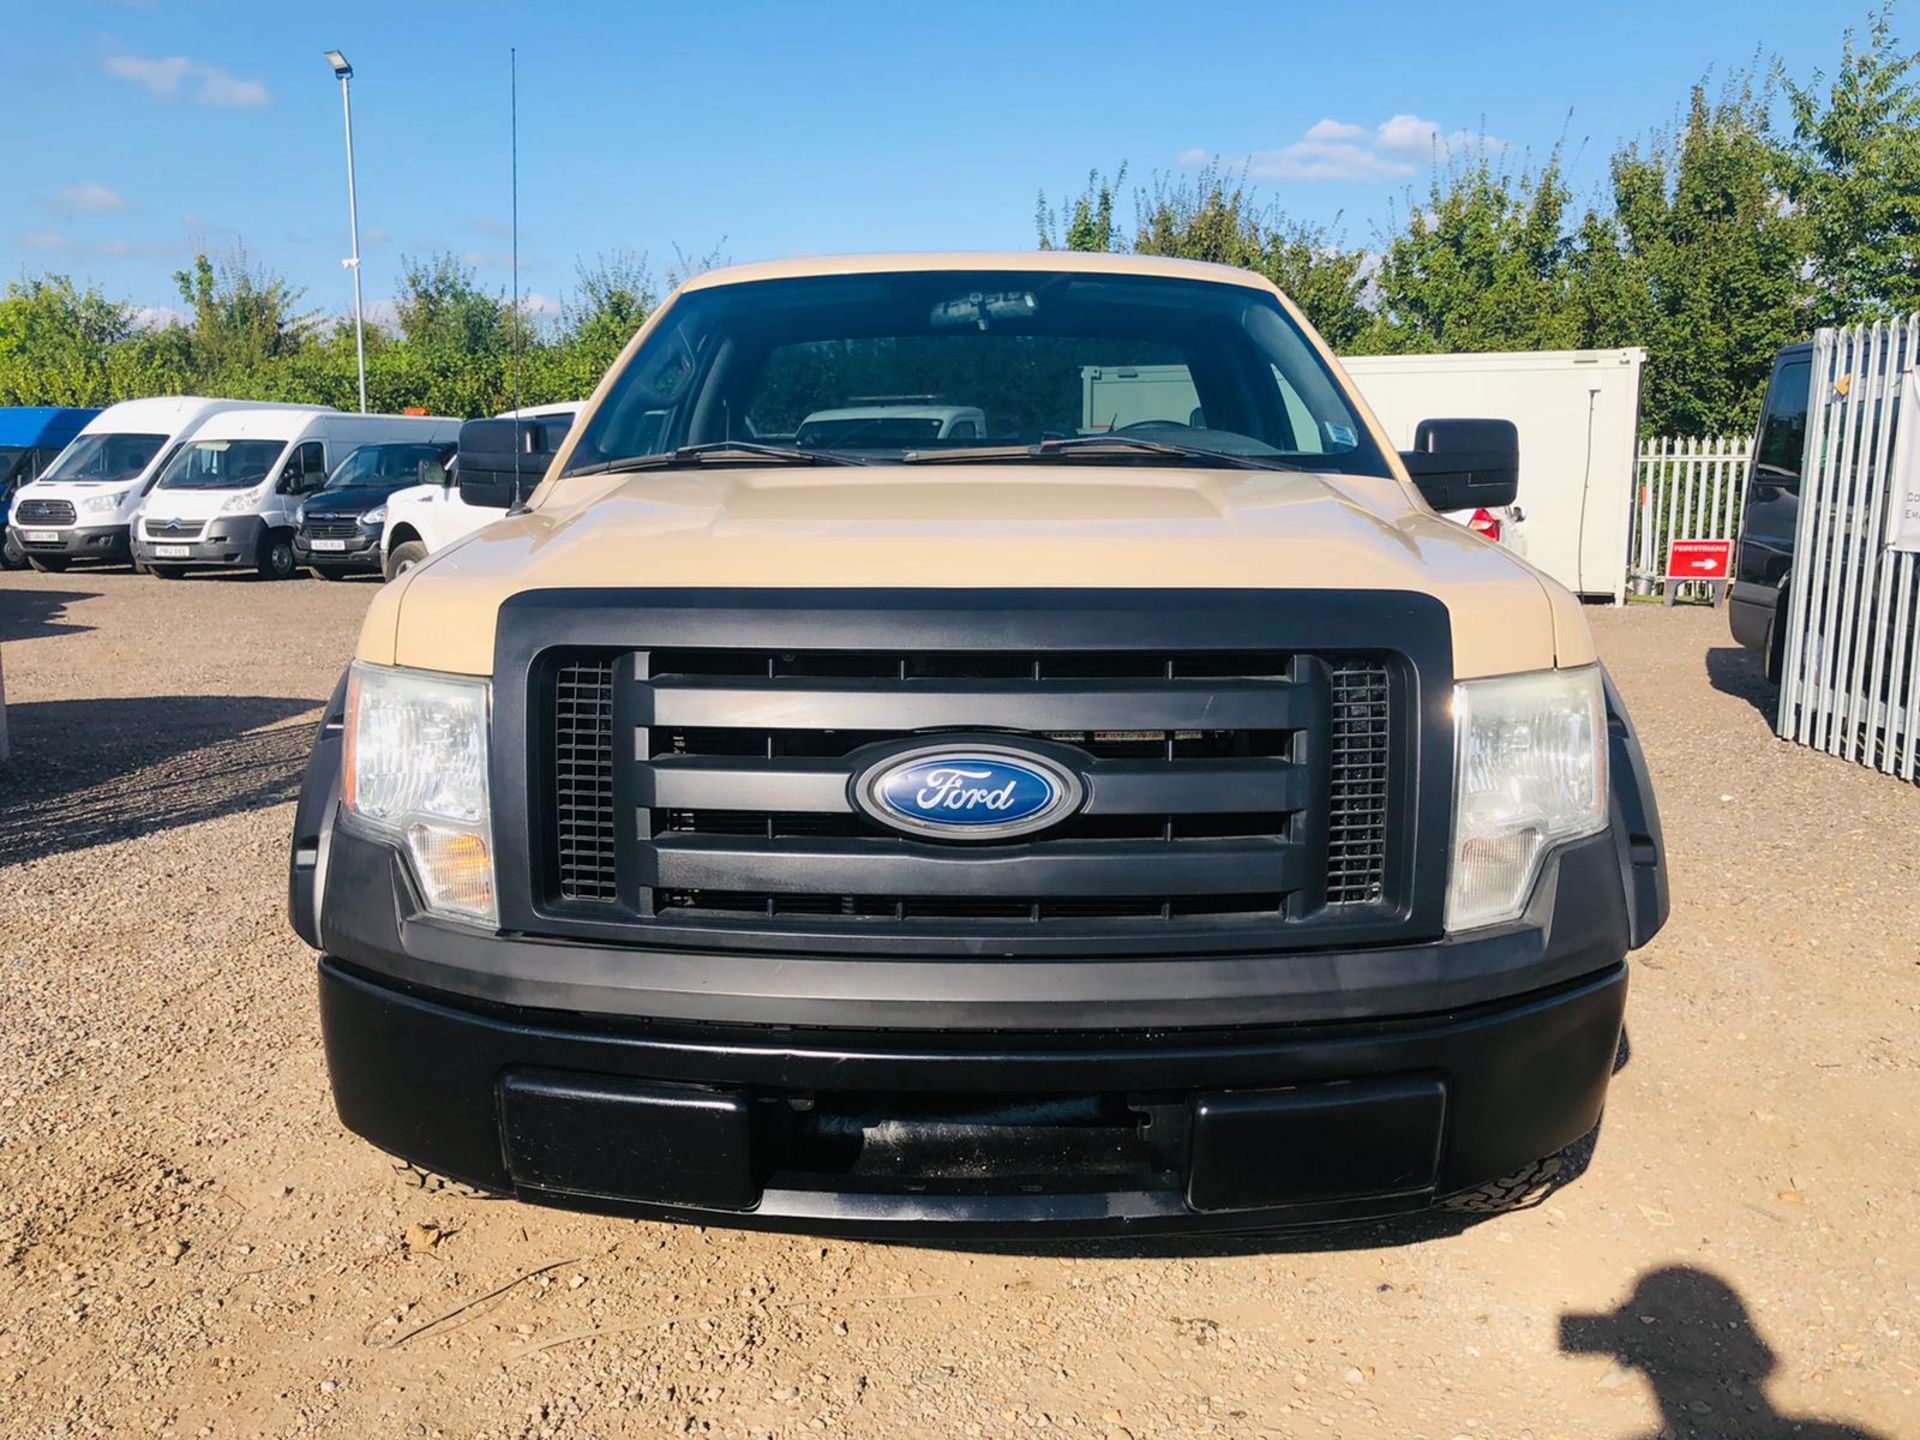 Ford F-150 4.6L V8 Single-Cab '2010 Year' Air Con - Fresh Import - No vat Save 20% - **No Reserve** - Image 2 of 15